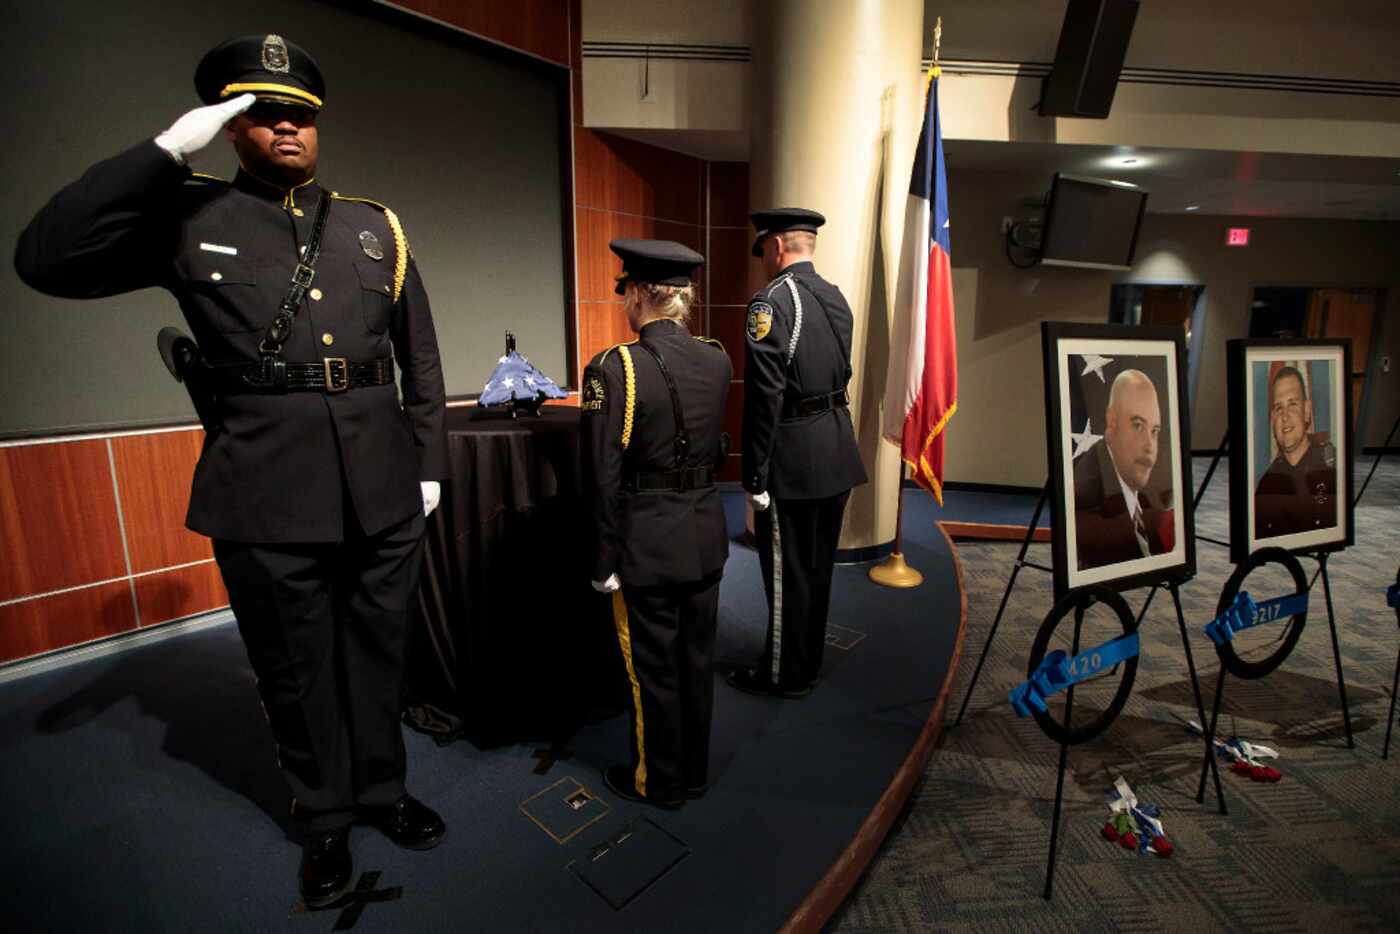 Shortly after 2 a.m. Tuesday, Dallas police Officer Londrell Tatum saluted with Senior Cpl....